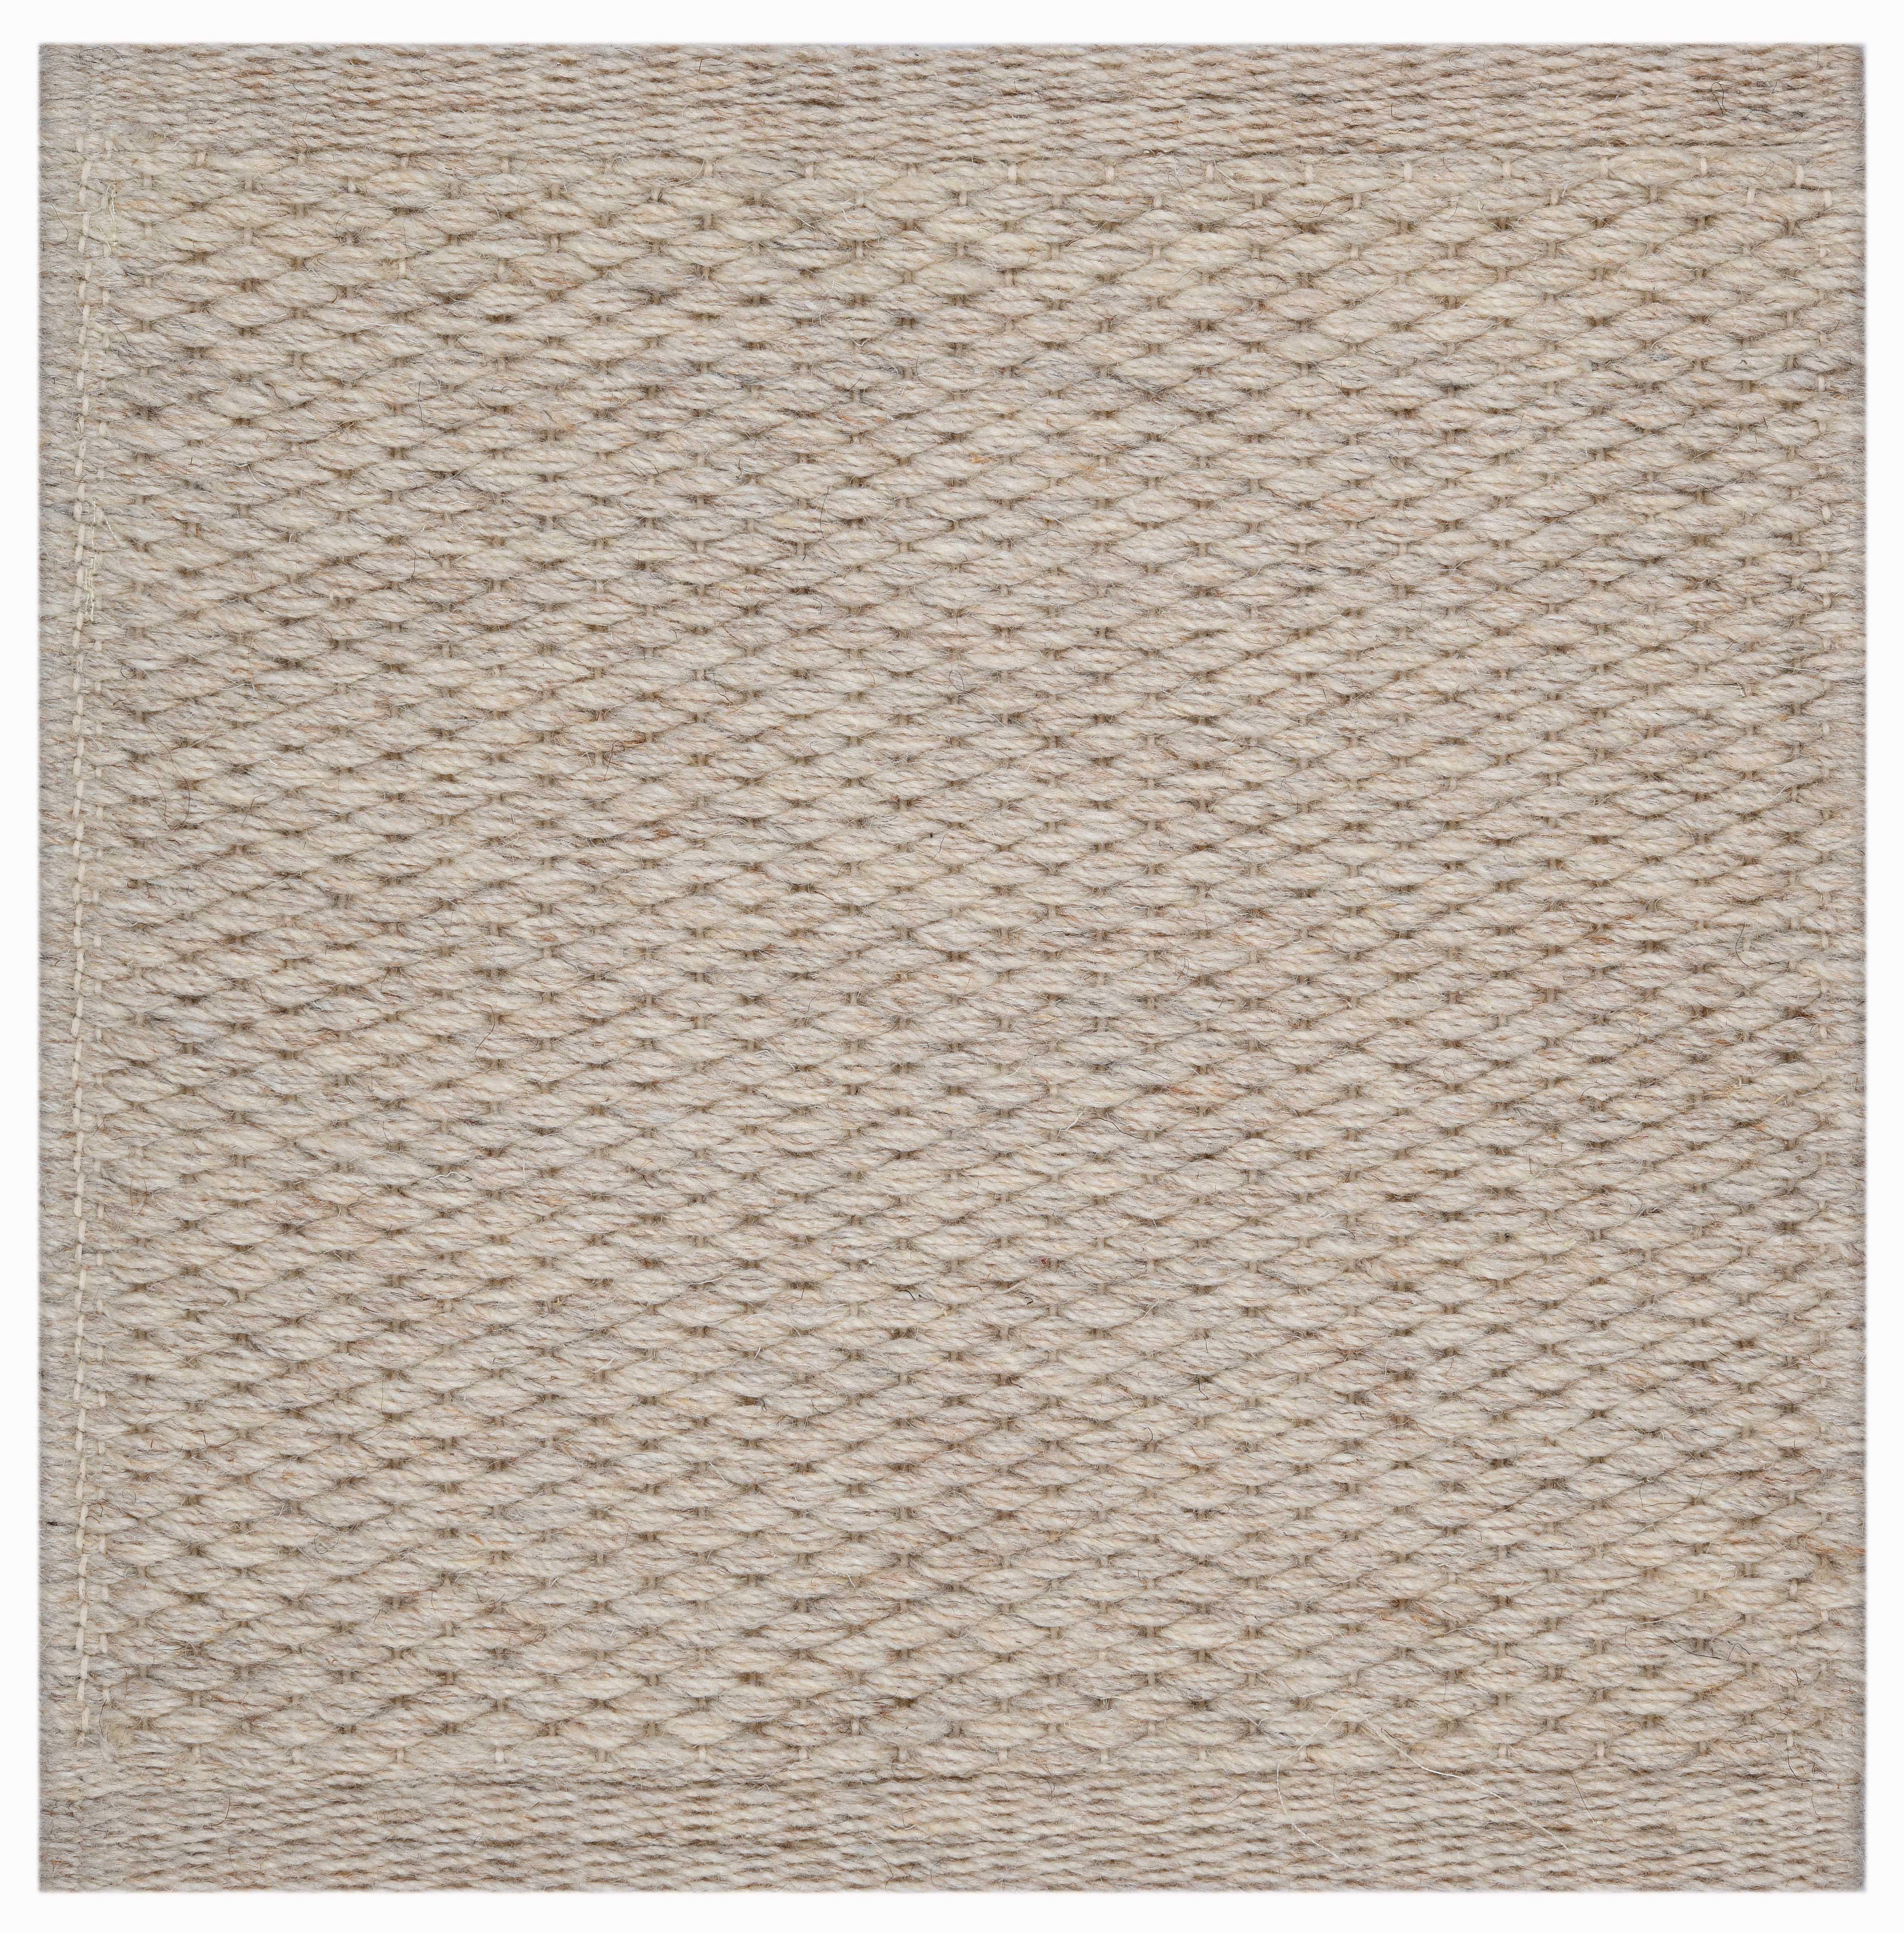 Contemporary Quies, Beige, Handwoven, New Zealand and Mediterranean wools, 8' x 10' For Sale